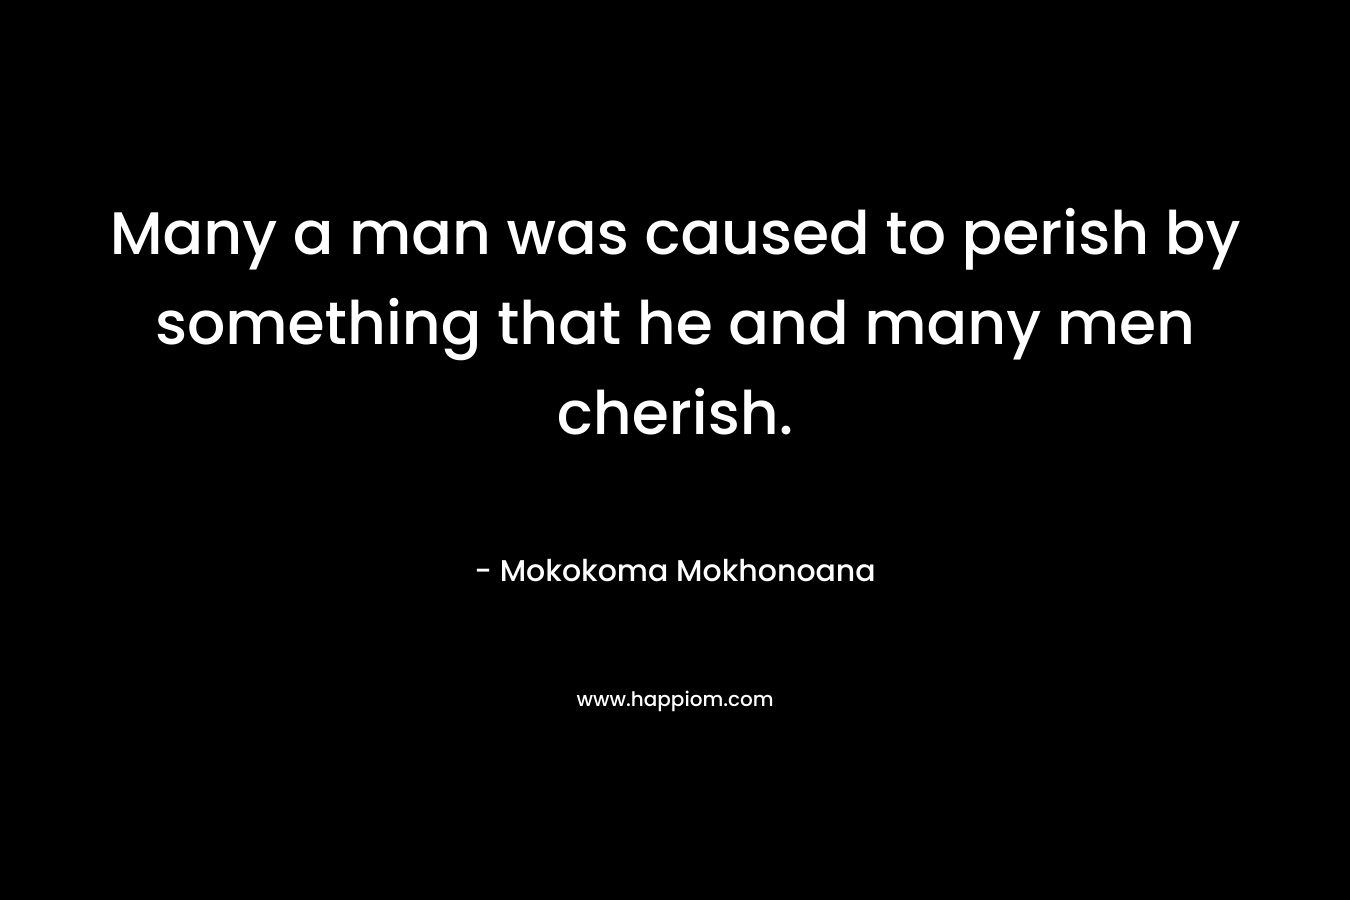 Many a man was caused to perish by something that he and many men cherish.